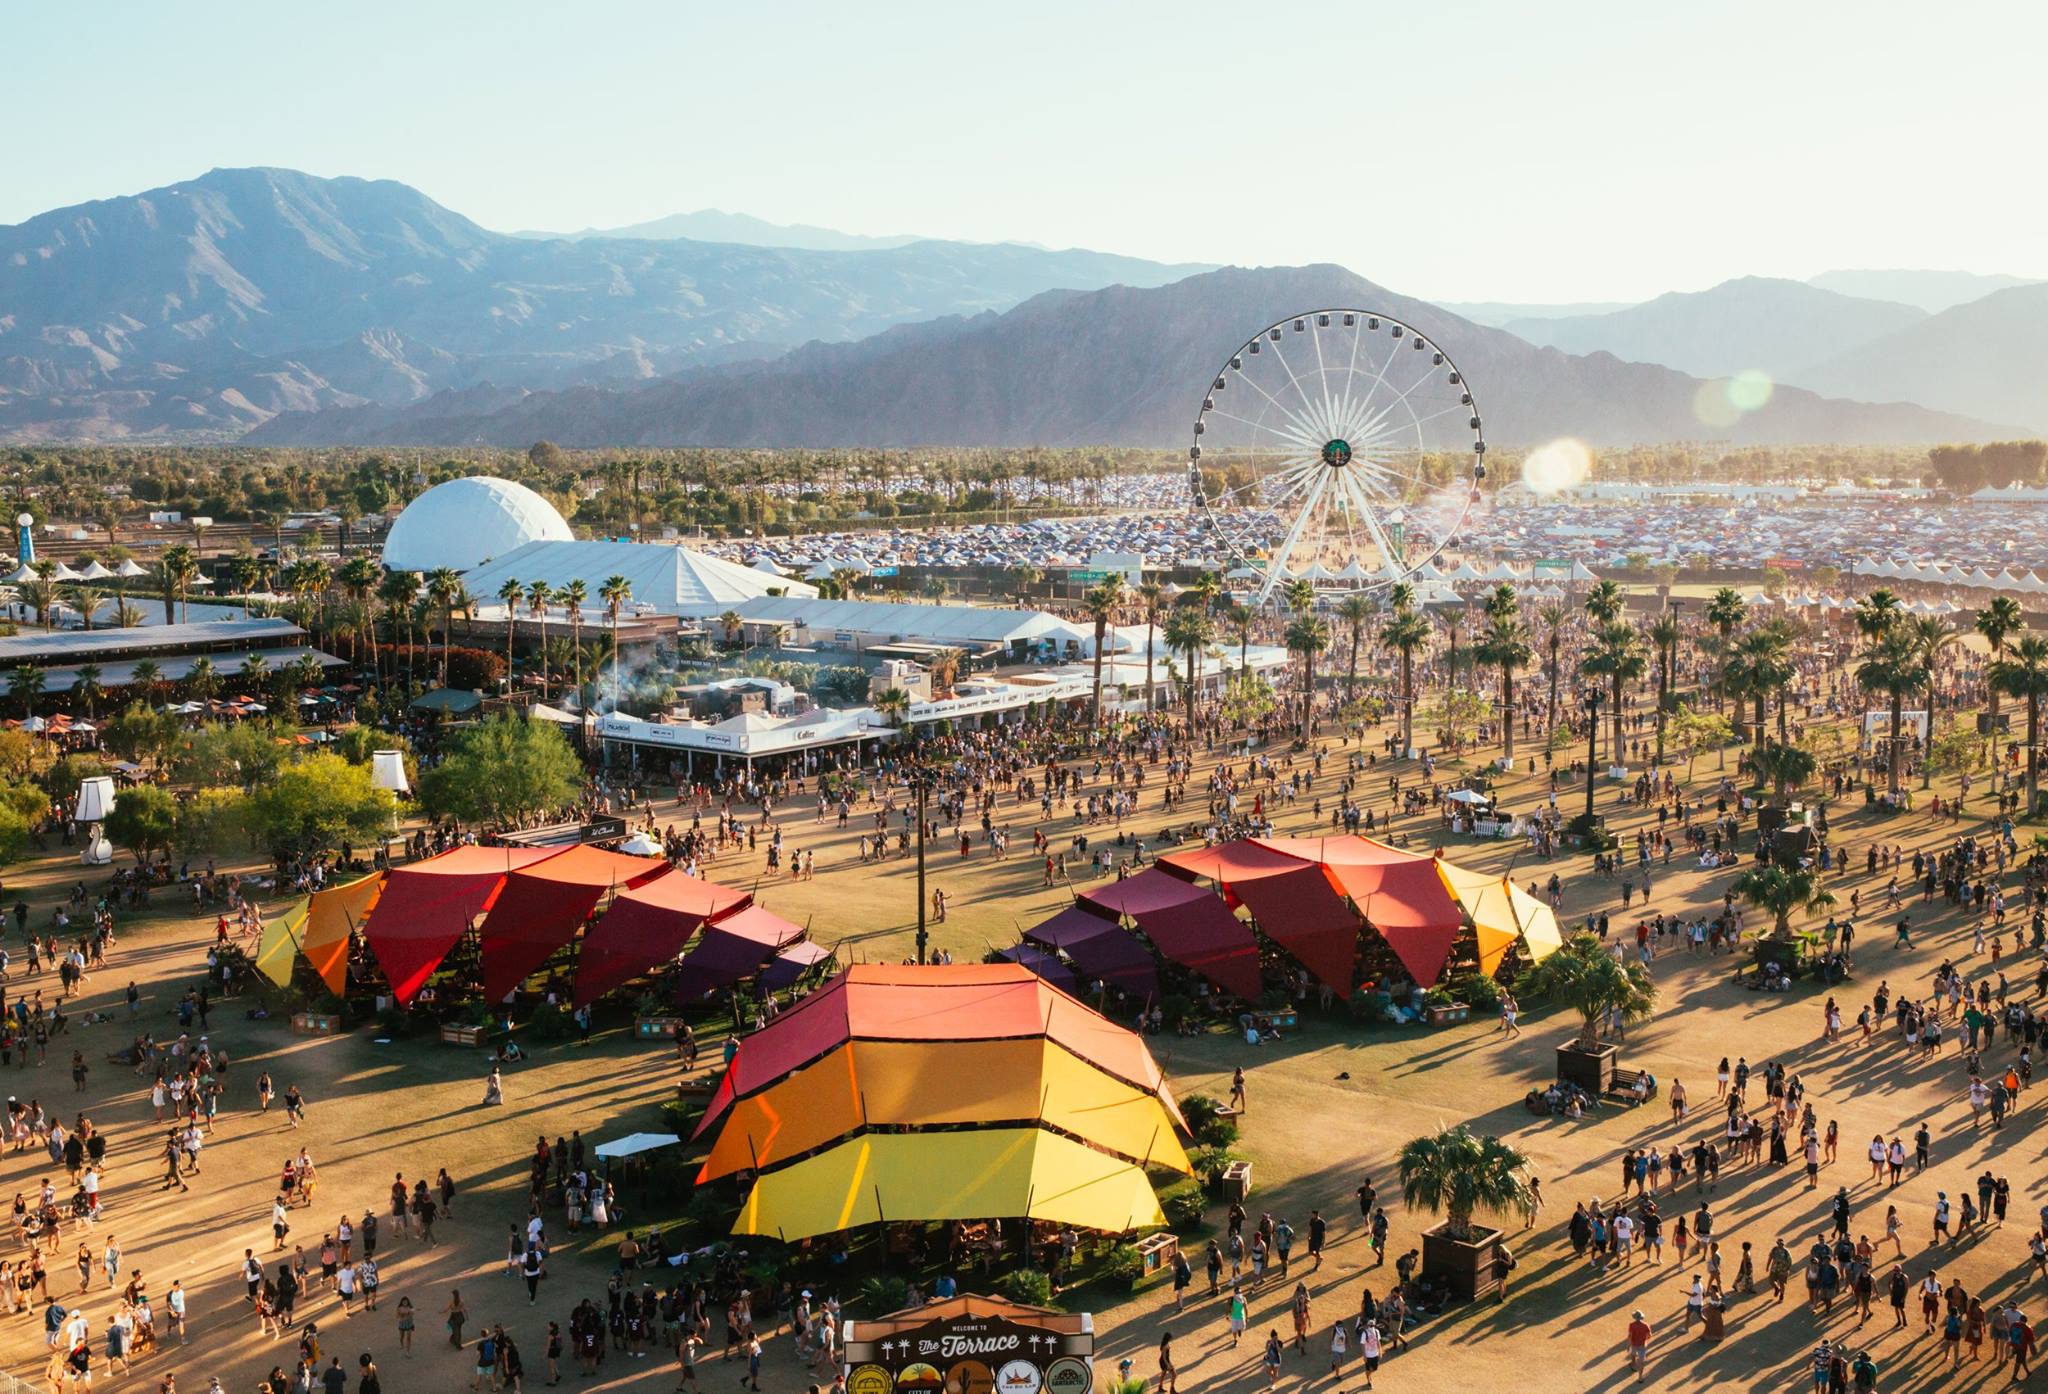 Coachella Valley 10 Things To Do in the Coachella Valley During the Wintertime OC Weekly